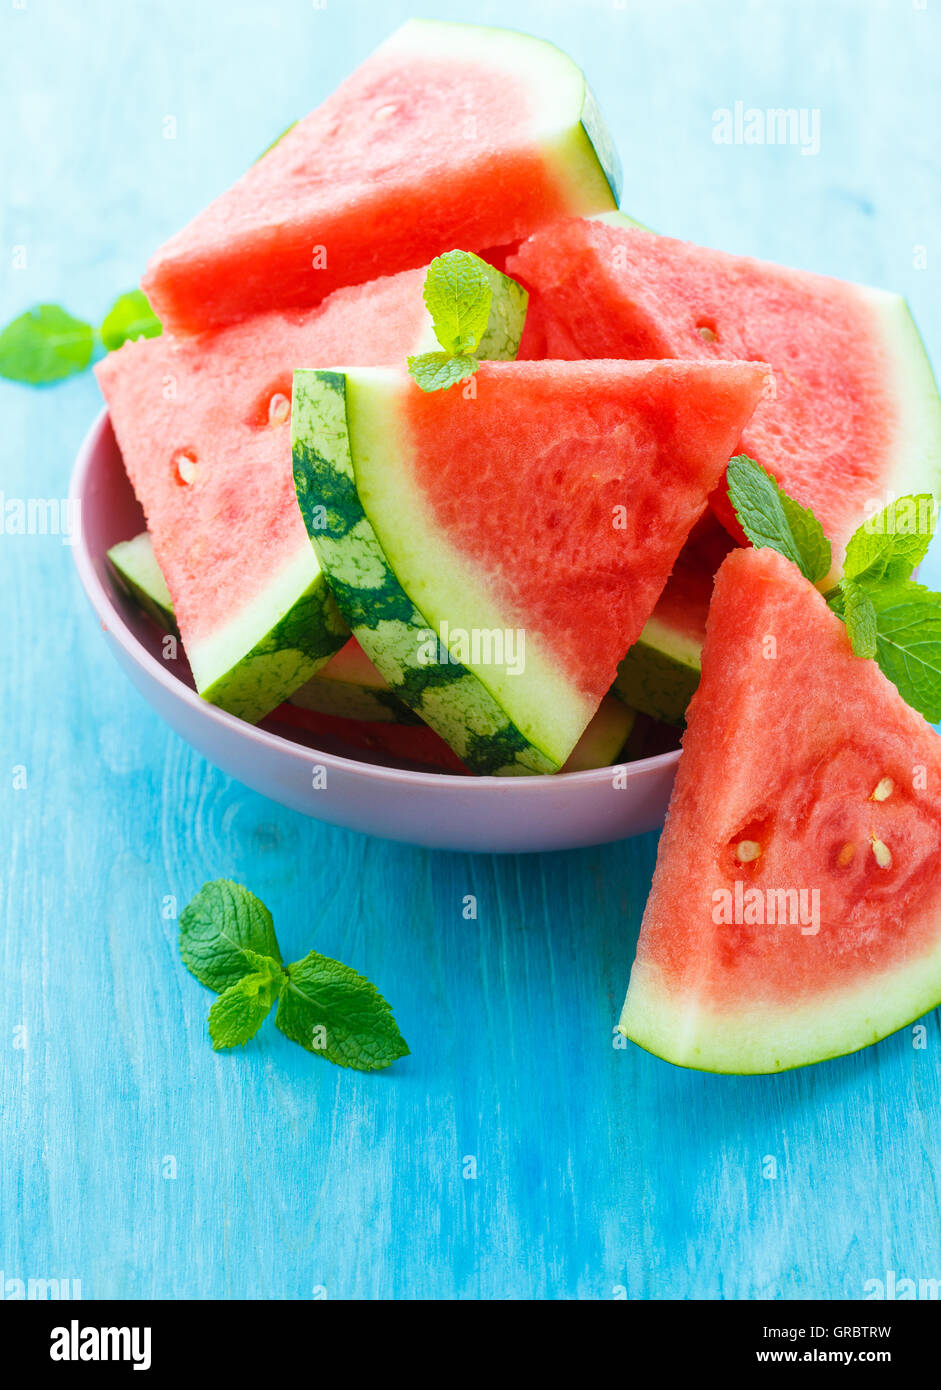 Triangular slices of fresh watermelon with mint on blue wooden background Stock Photo